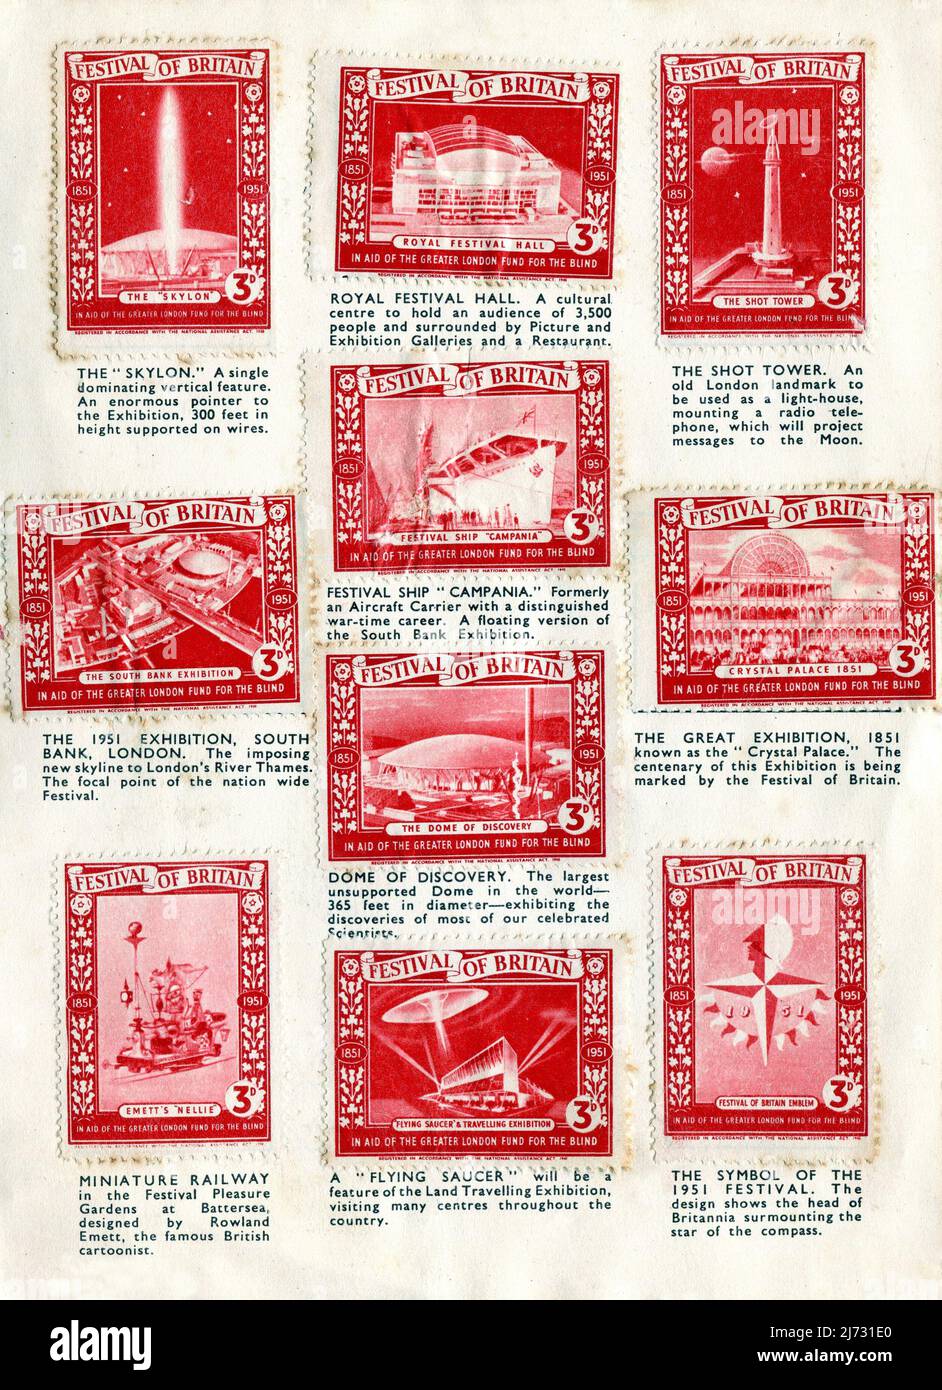 A collection of commemorative postage stamps produced as a souvenir of the Festival of Britain exhibition in 1951 and sold in aid of ‘The Greater London Fund Tor The Blind’. Each stamp is a miniature reproduction of festival posters. The stamps depict The ‘Skylon’; The Royal Festival Hall; The Shot Tower; The 1951 Exhibition; South Bank London; The Festival Ship ‘Campania’ The Great Exhibition 1851; The Dome of Discovery; Rowland Emett’s Miniature Railway; A ‘Flying Saucer’; and The Symbol of the 1951 Festival. Stock Photo